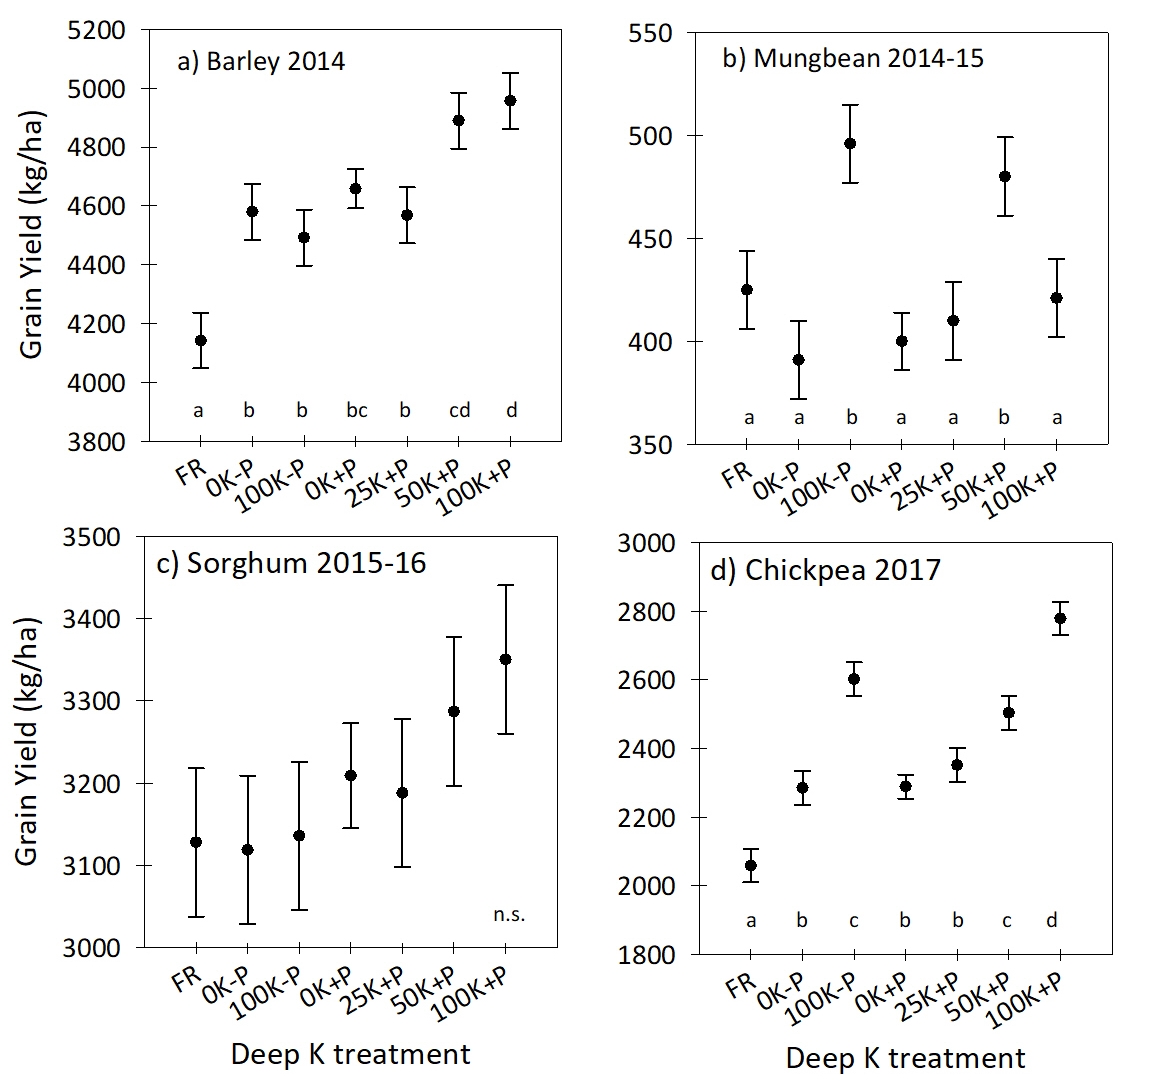 Figure 2. Grain yield (kg/ha) from deep-placed K and P treatments at Jimbour West for a) barley in 2014, b) mungbean in 2014-15, c) sorghum in 2015-16 and d) chickpea in 2017. Error bar are standard error for each mean.  